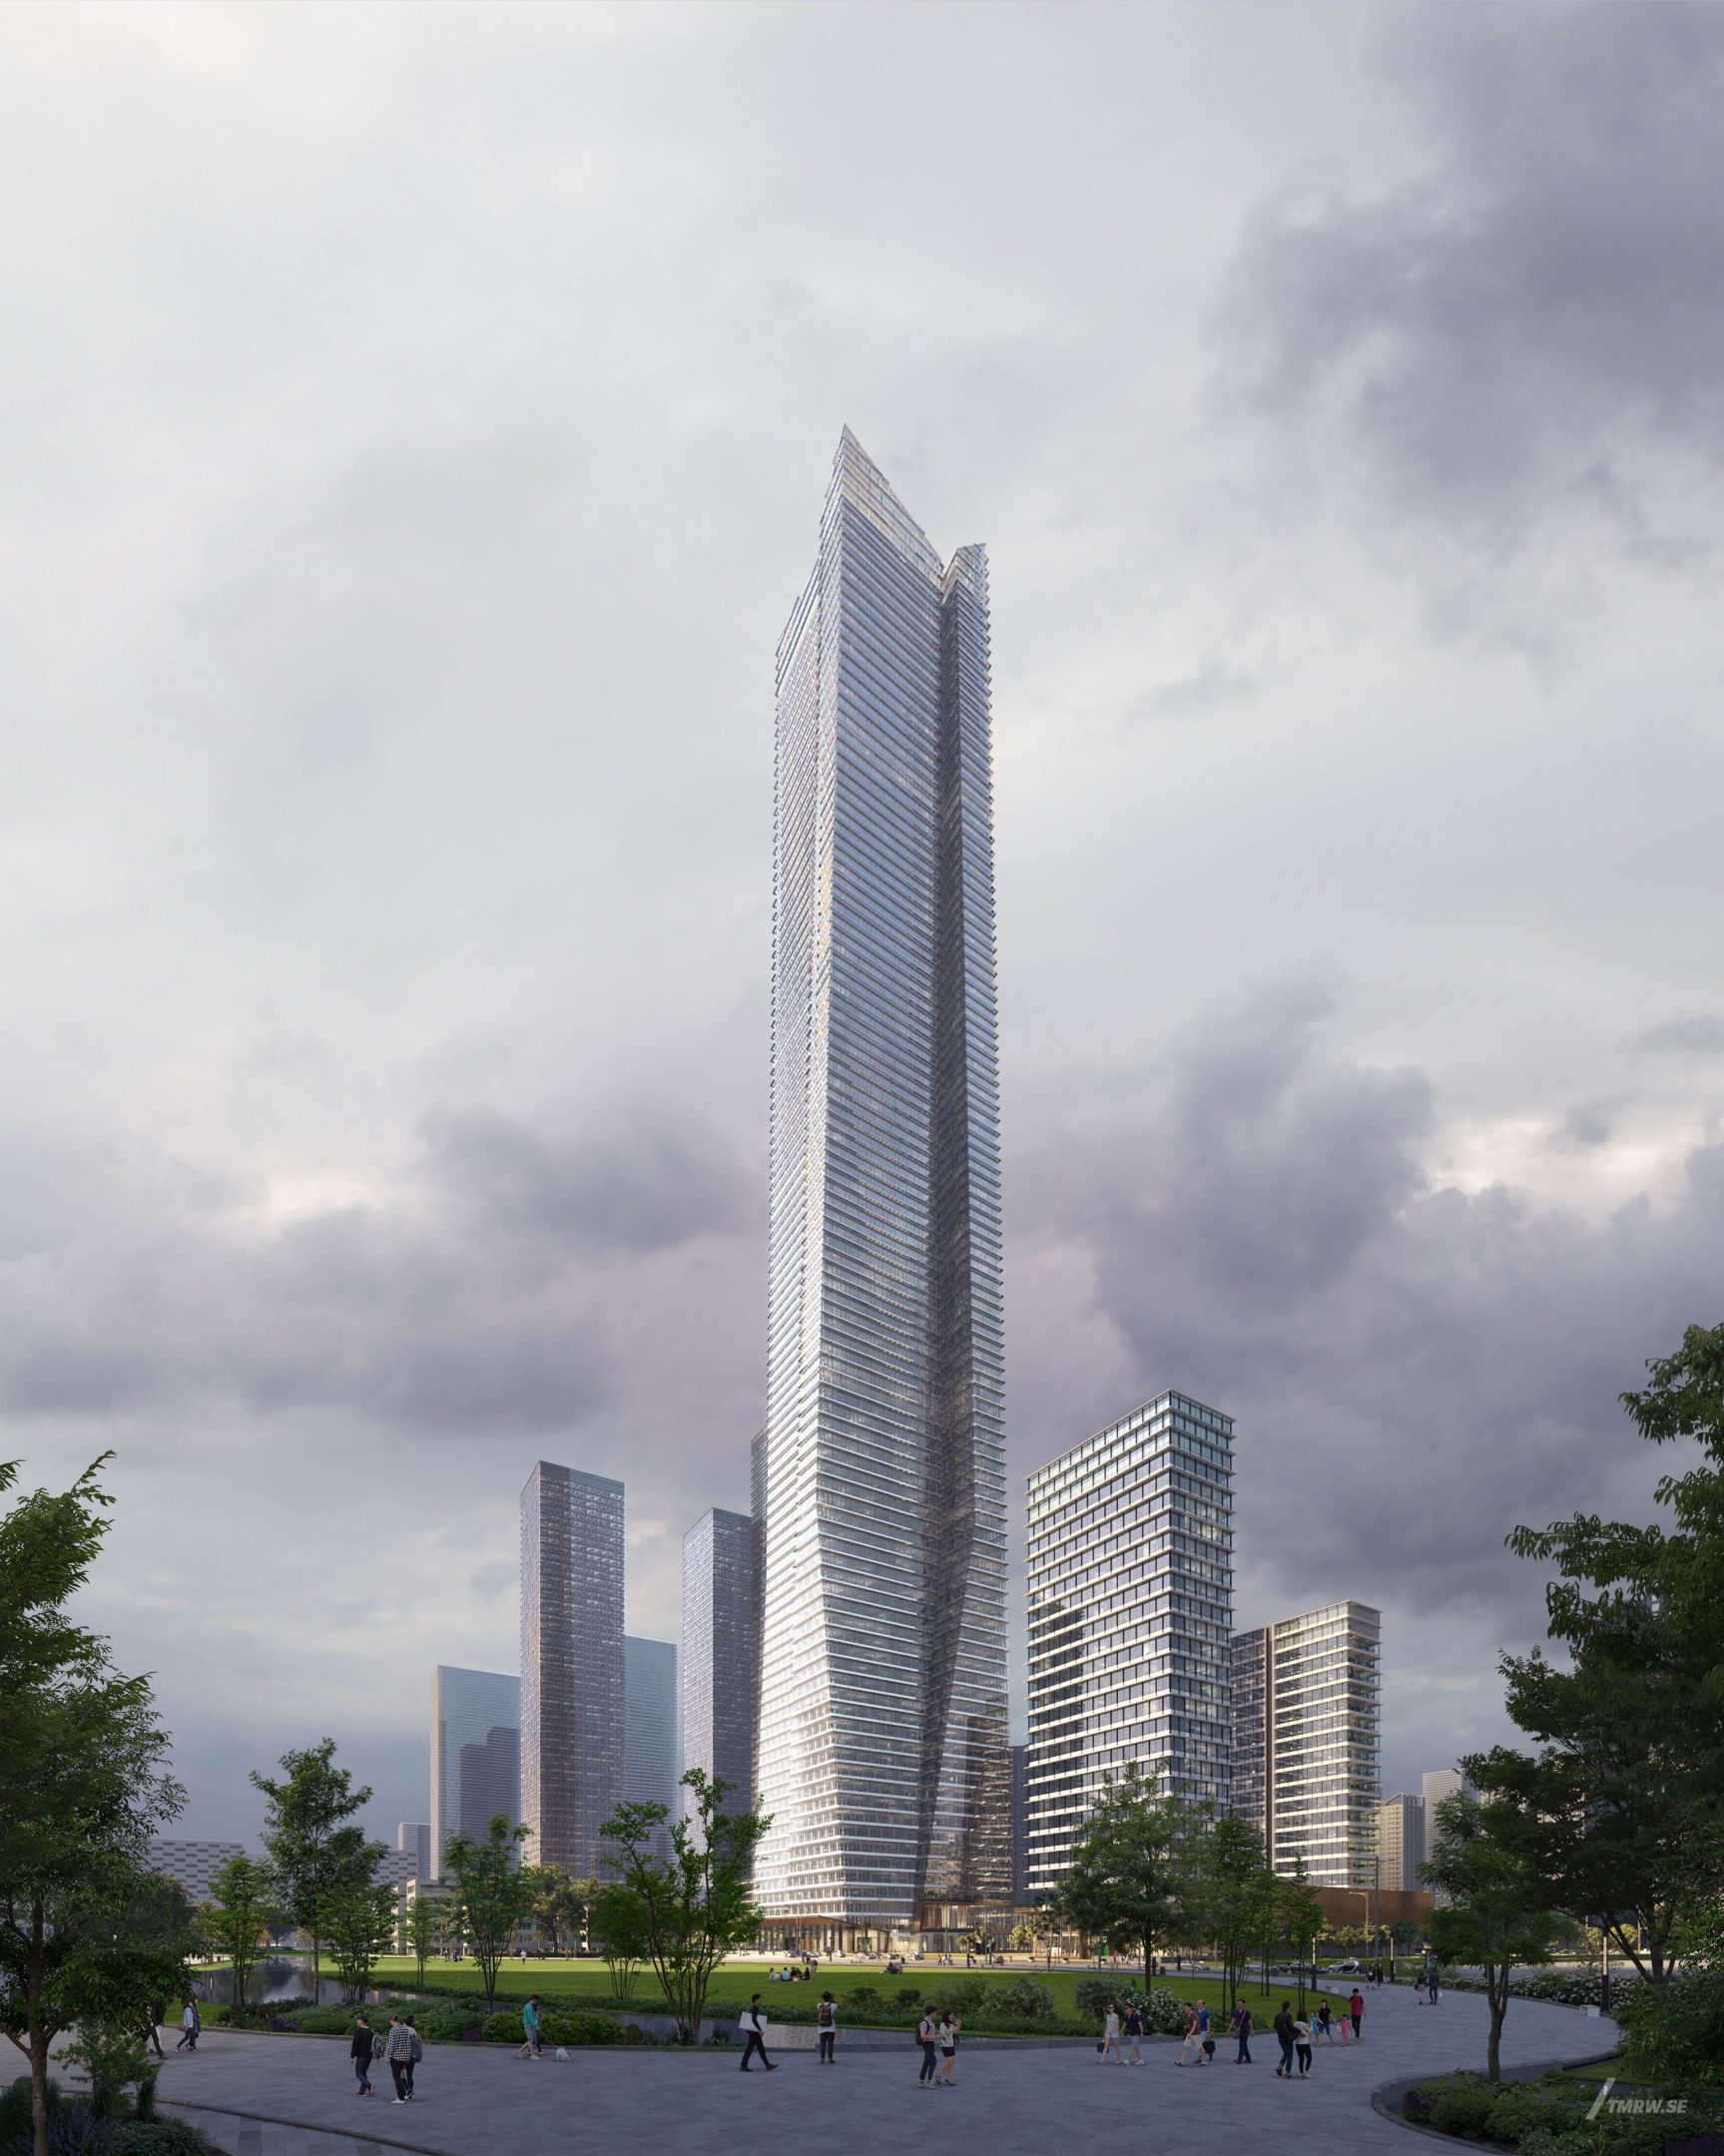 Architectural visualization of 320 West 31 Front for KPF, an Office building during dusk from a street view.